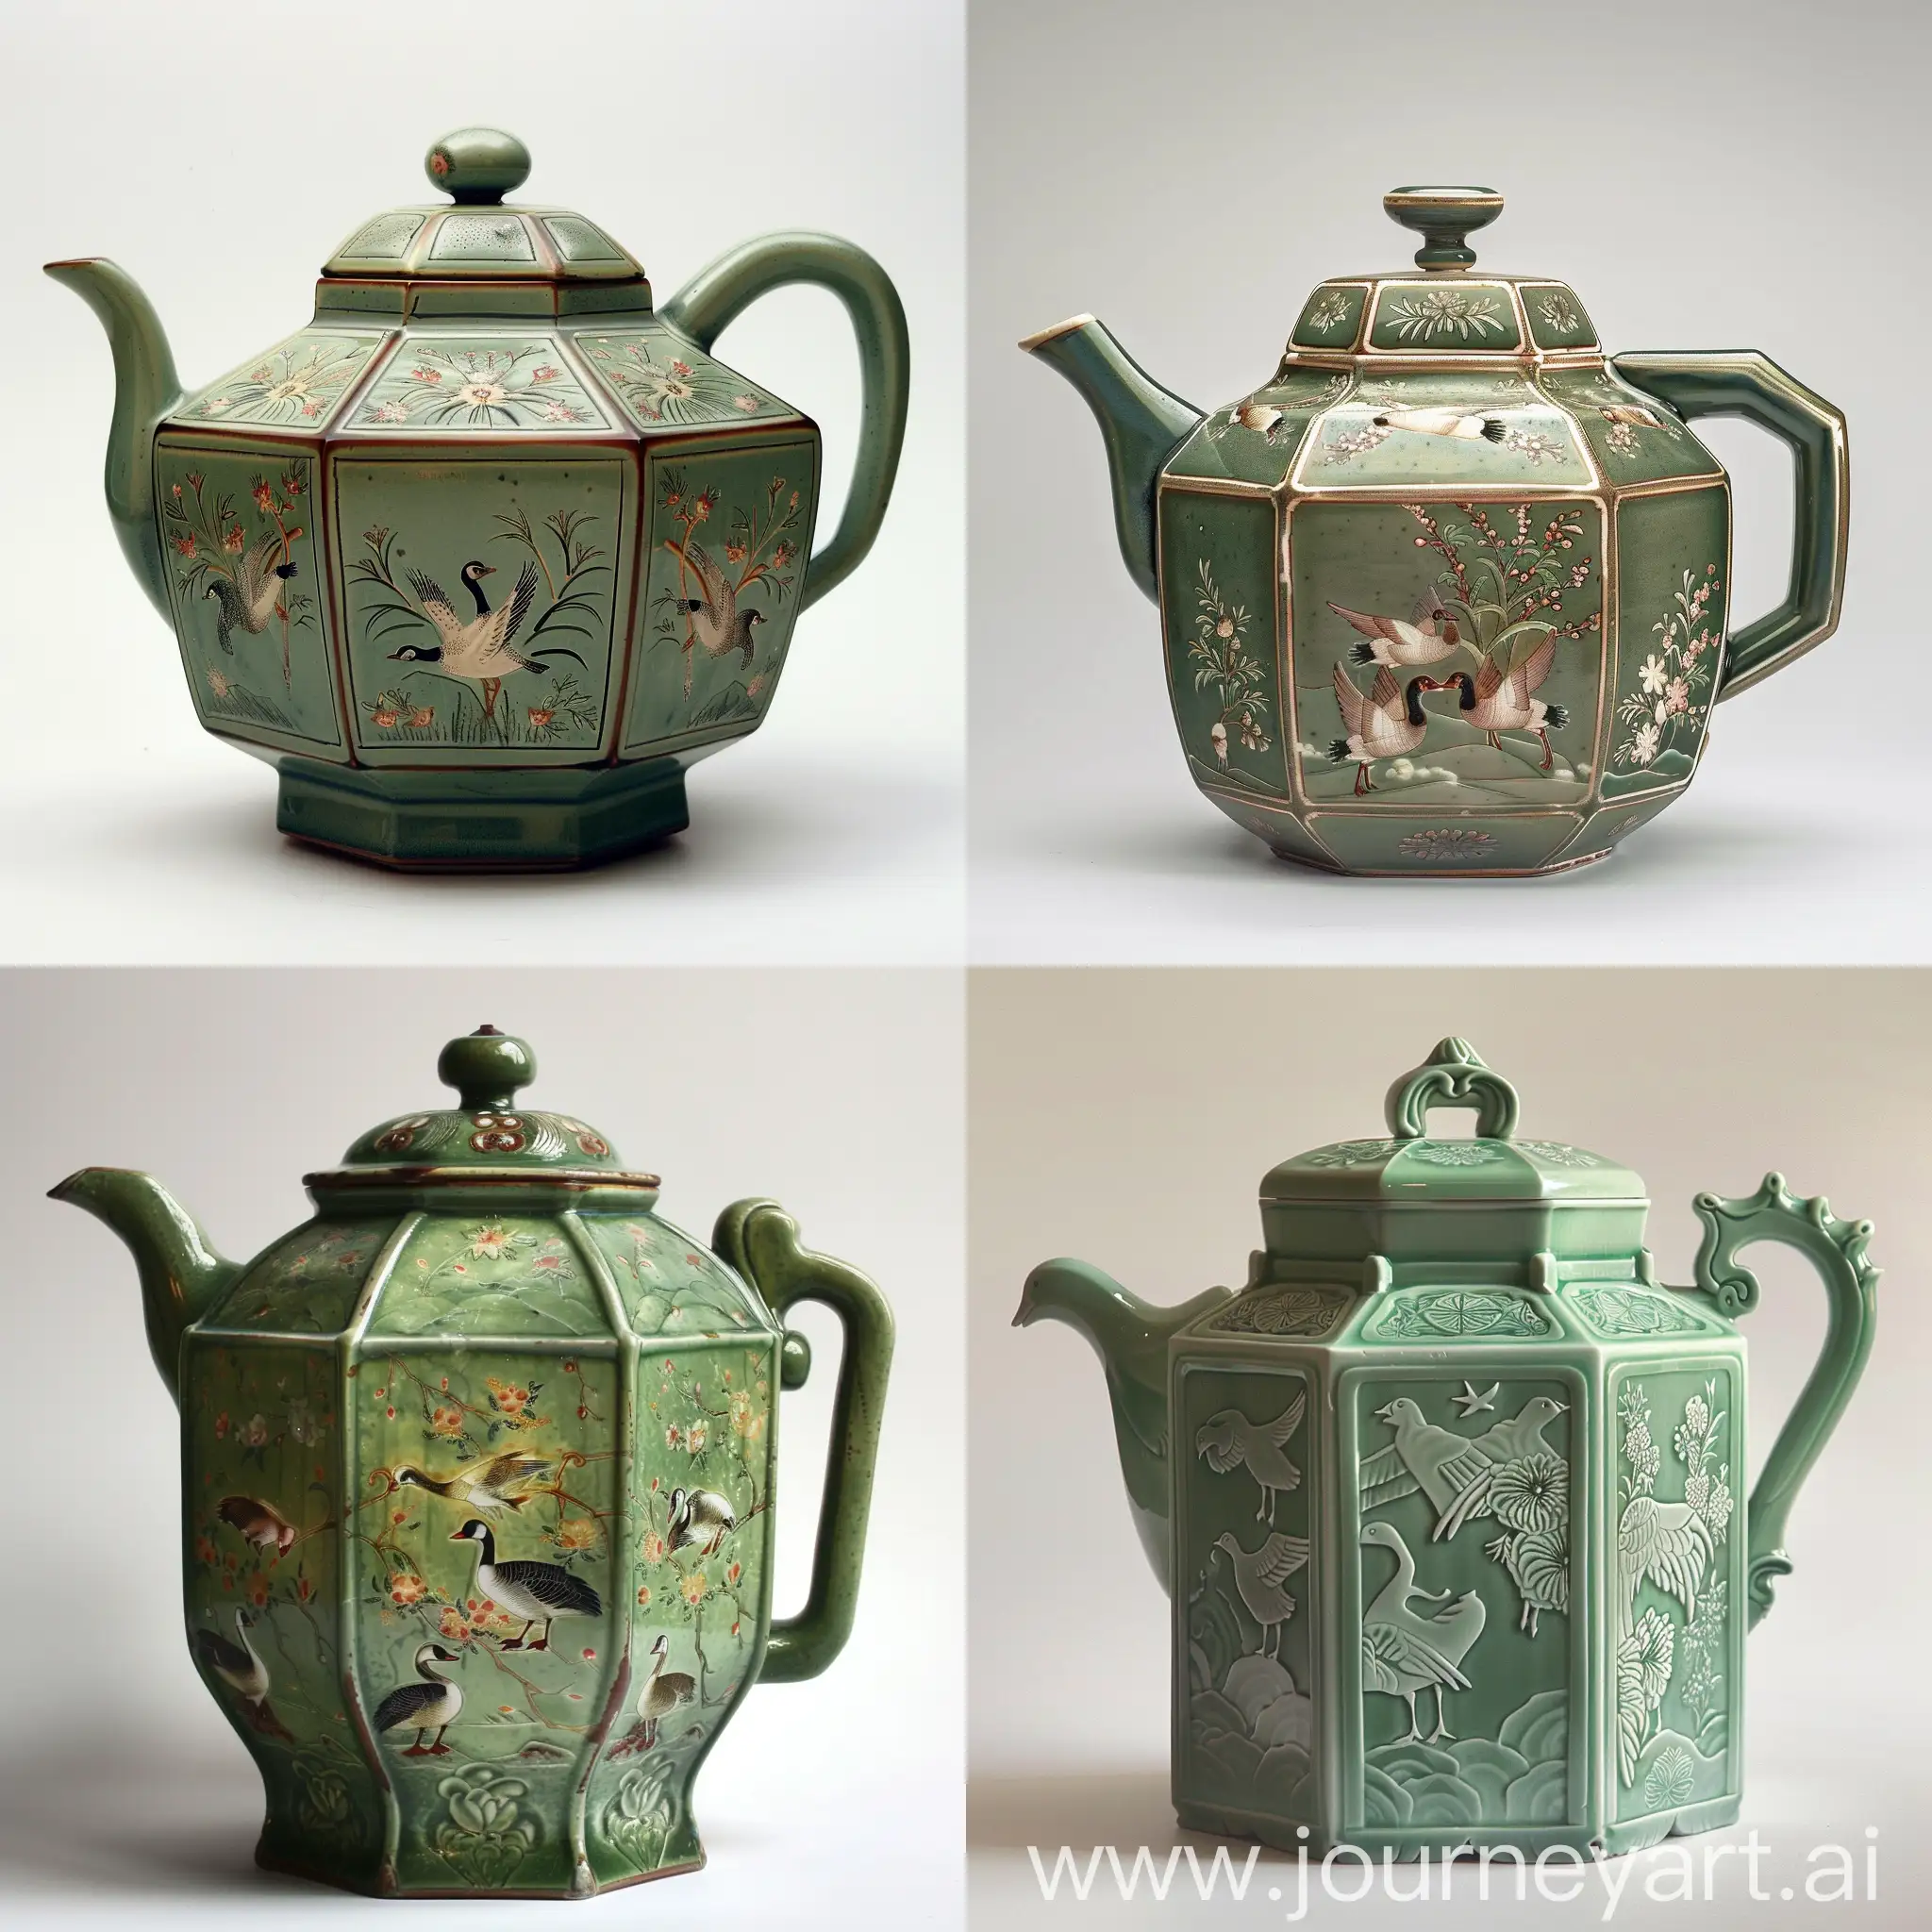 Chinese-Octagonal-Teapot-with-Gradient-Green-Color-and-Geese-and-Flower-Patterns